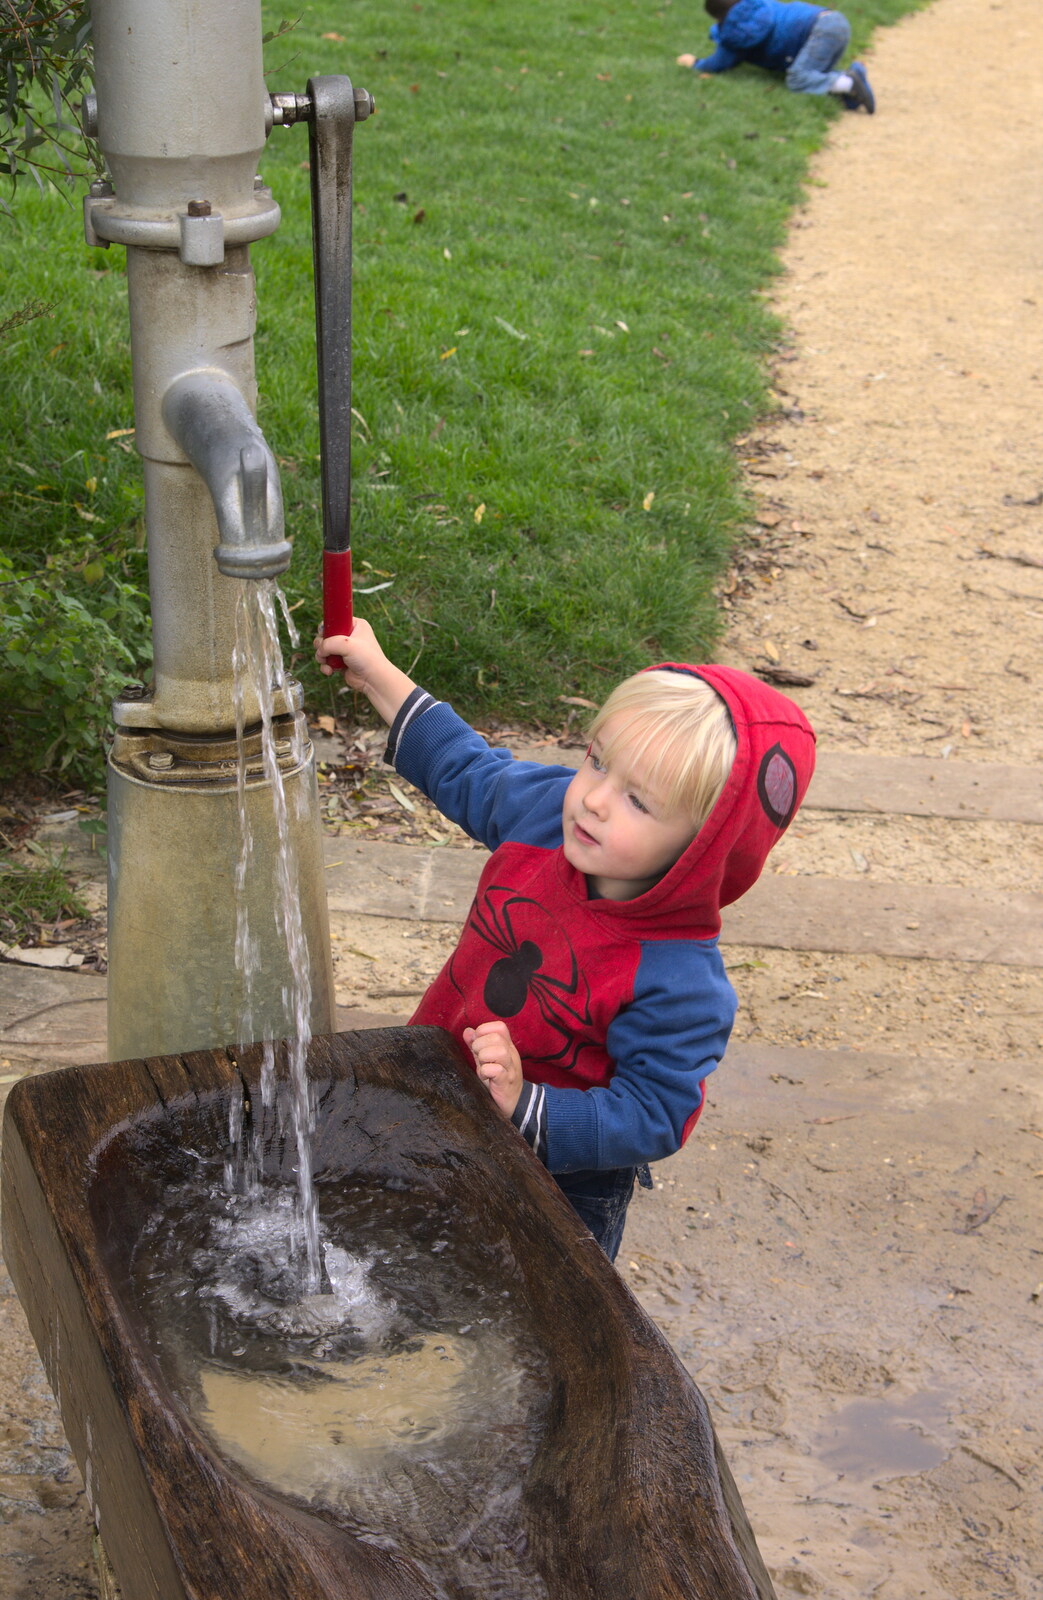 Harry has a go of the pump from A Trip to Abbey Gardens, Bury St. Edmunds, Suffolk - 29th October 2014